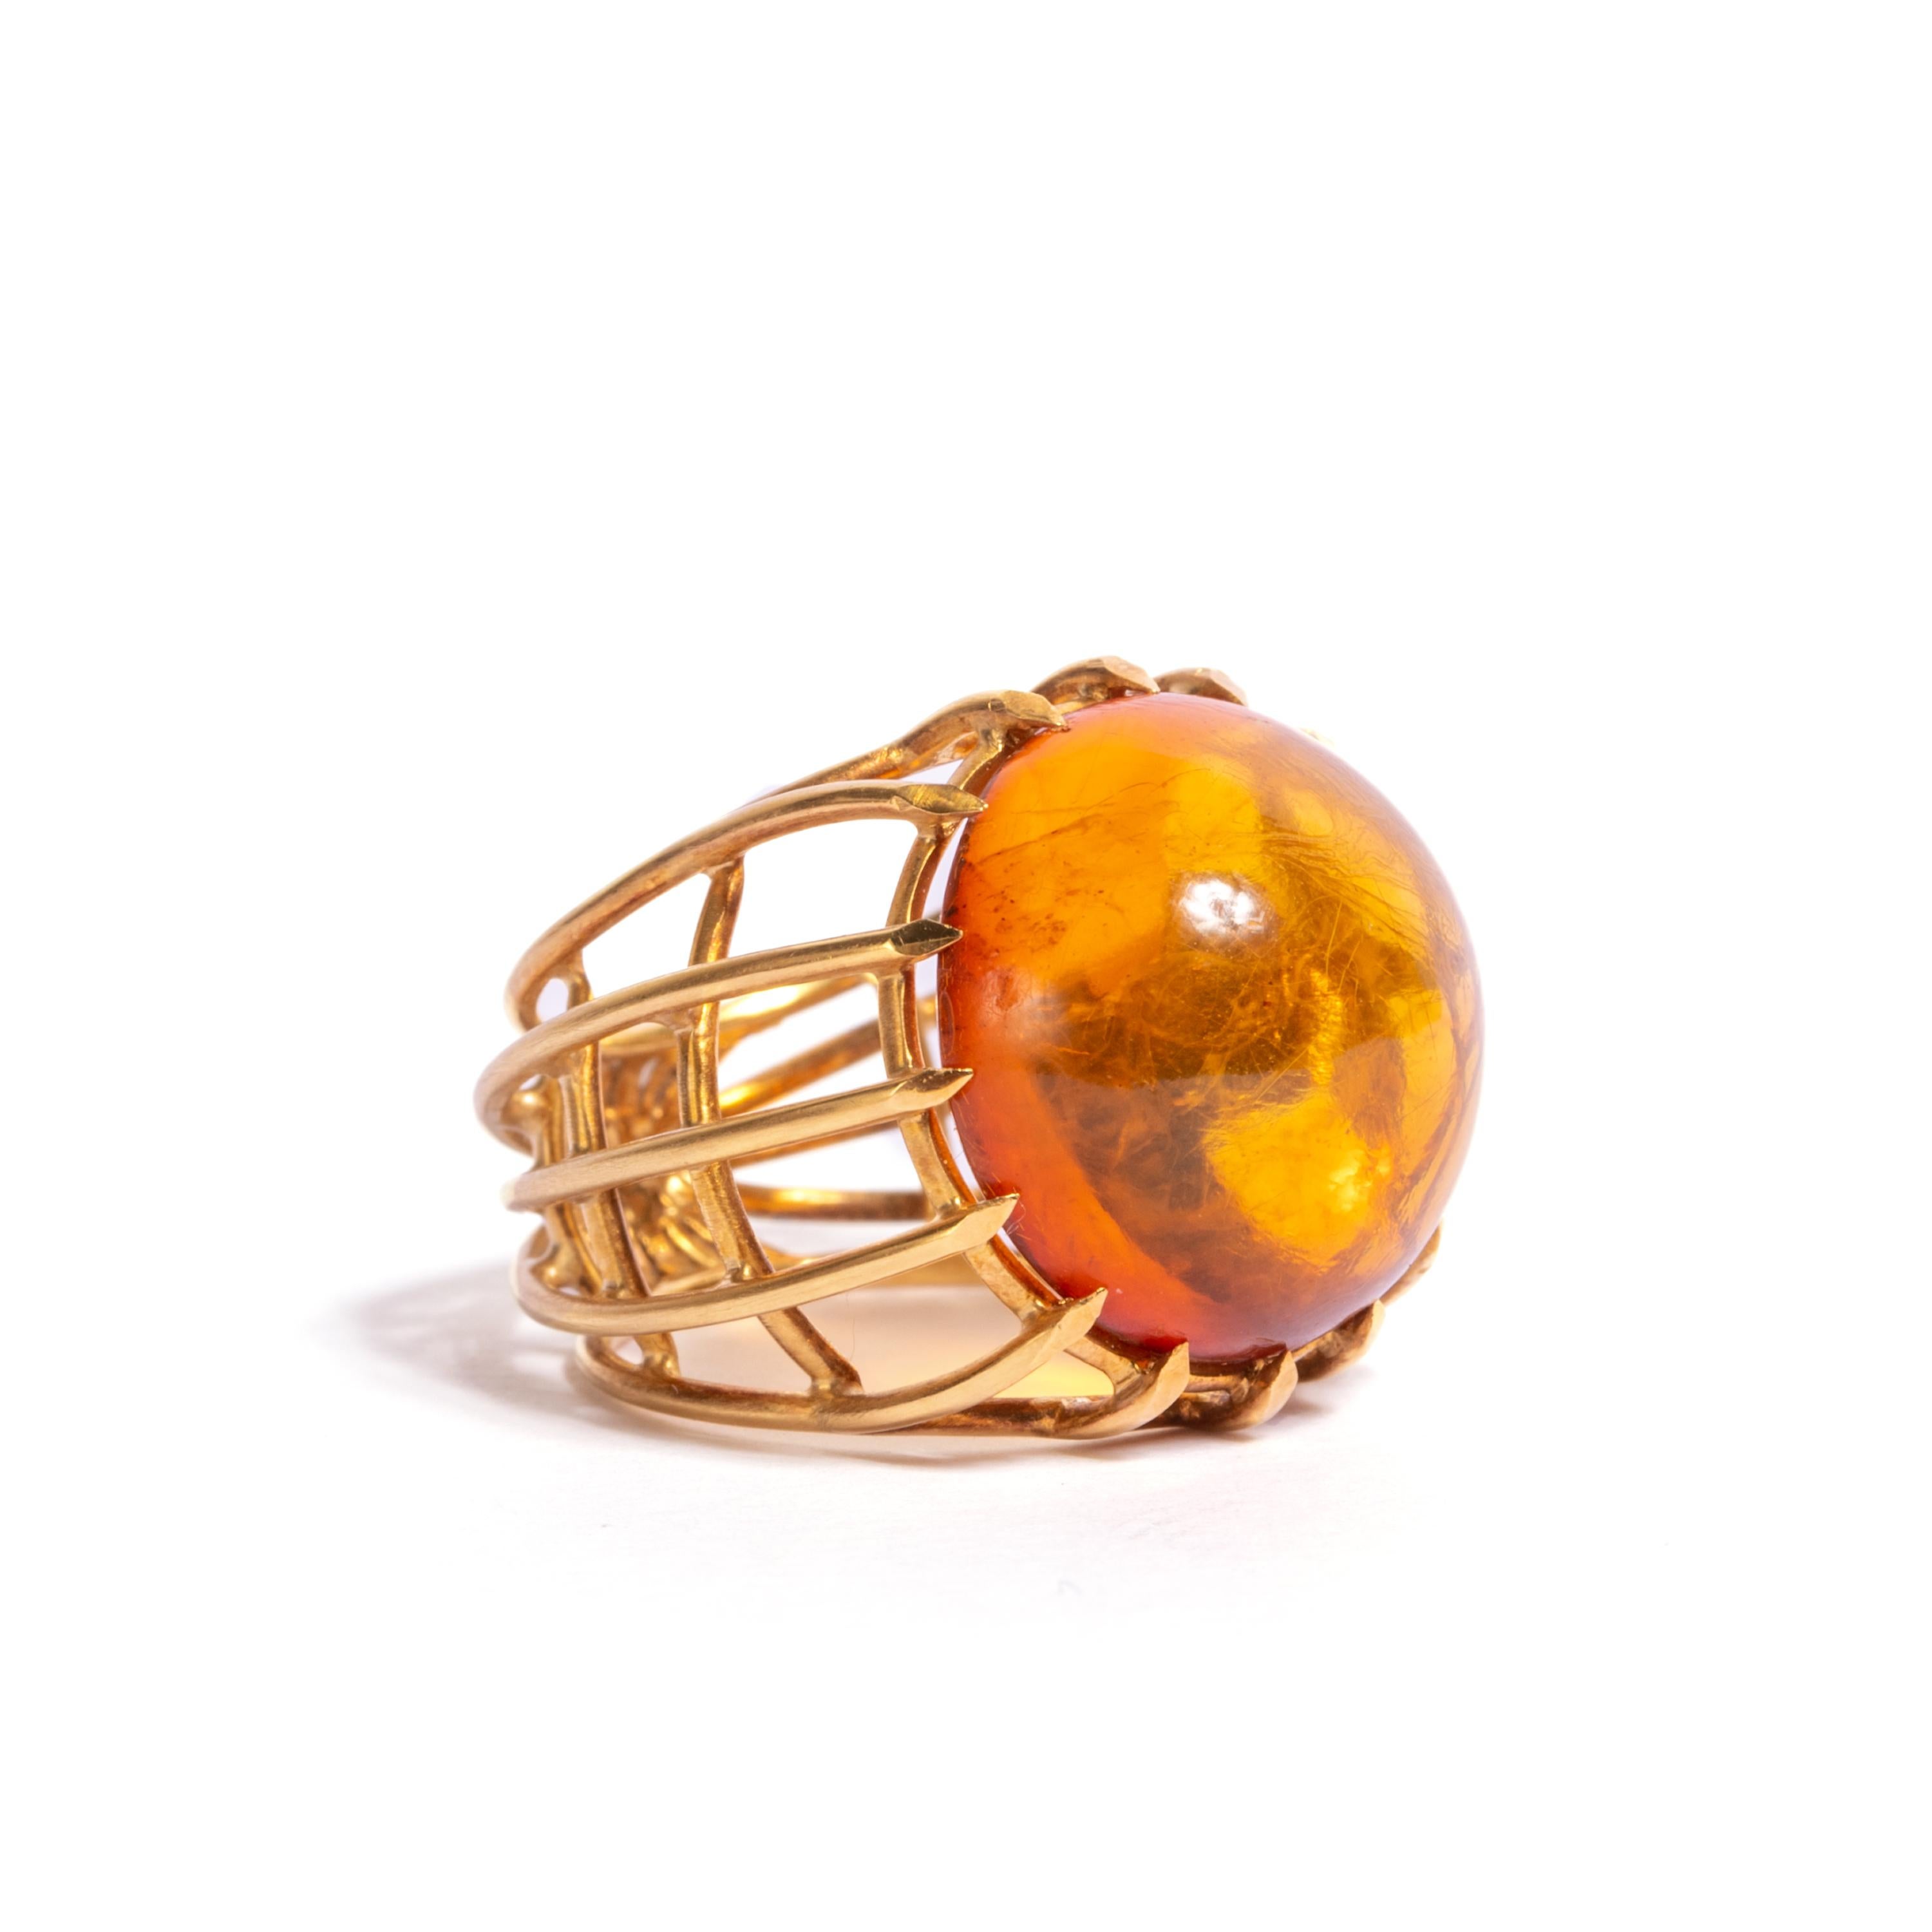 Beautiful ring by the Italian designer Giancarlo Montebello. The ring were designed directly for our Enrico Trizio 1868 jewelry. A very elegant yellow gold ring 